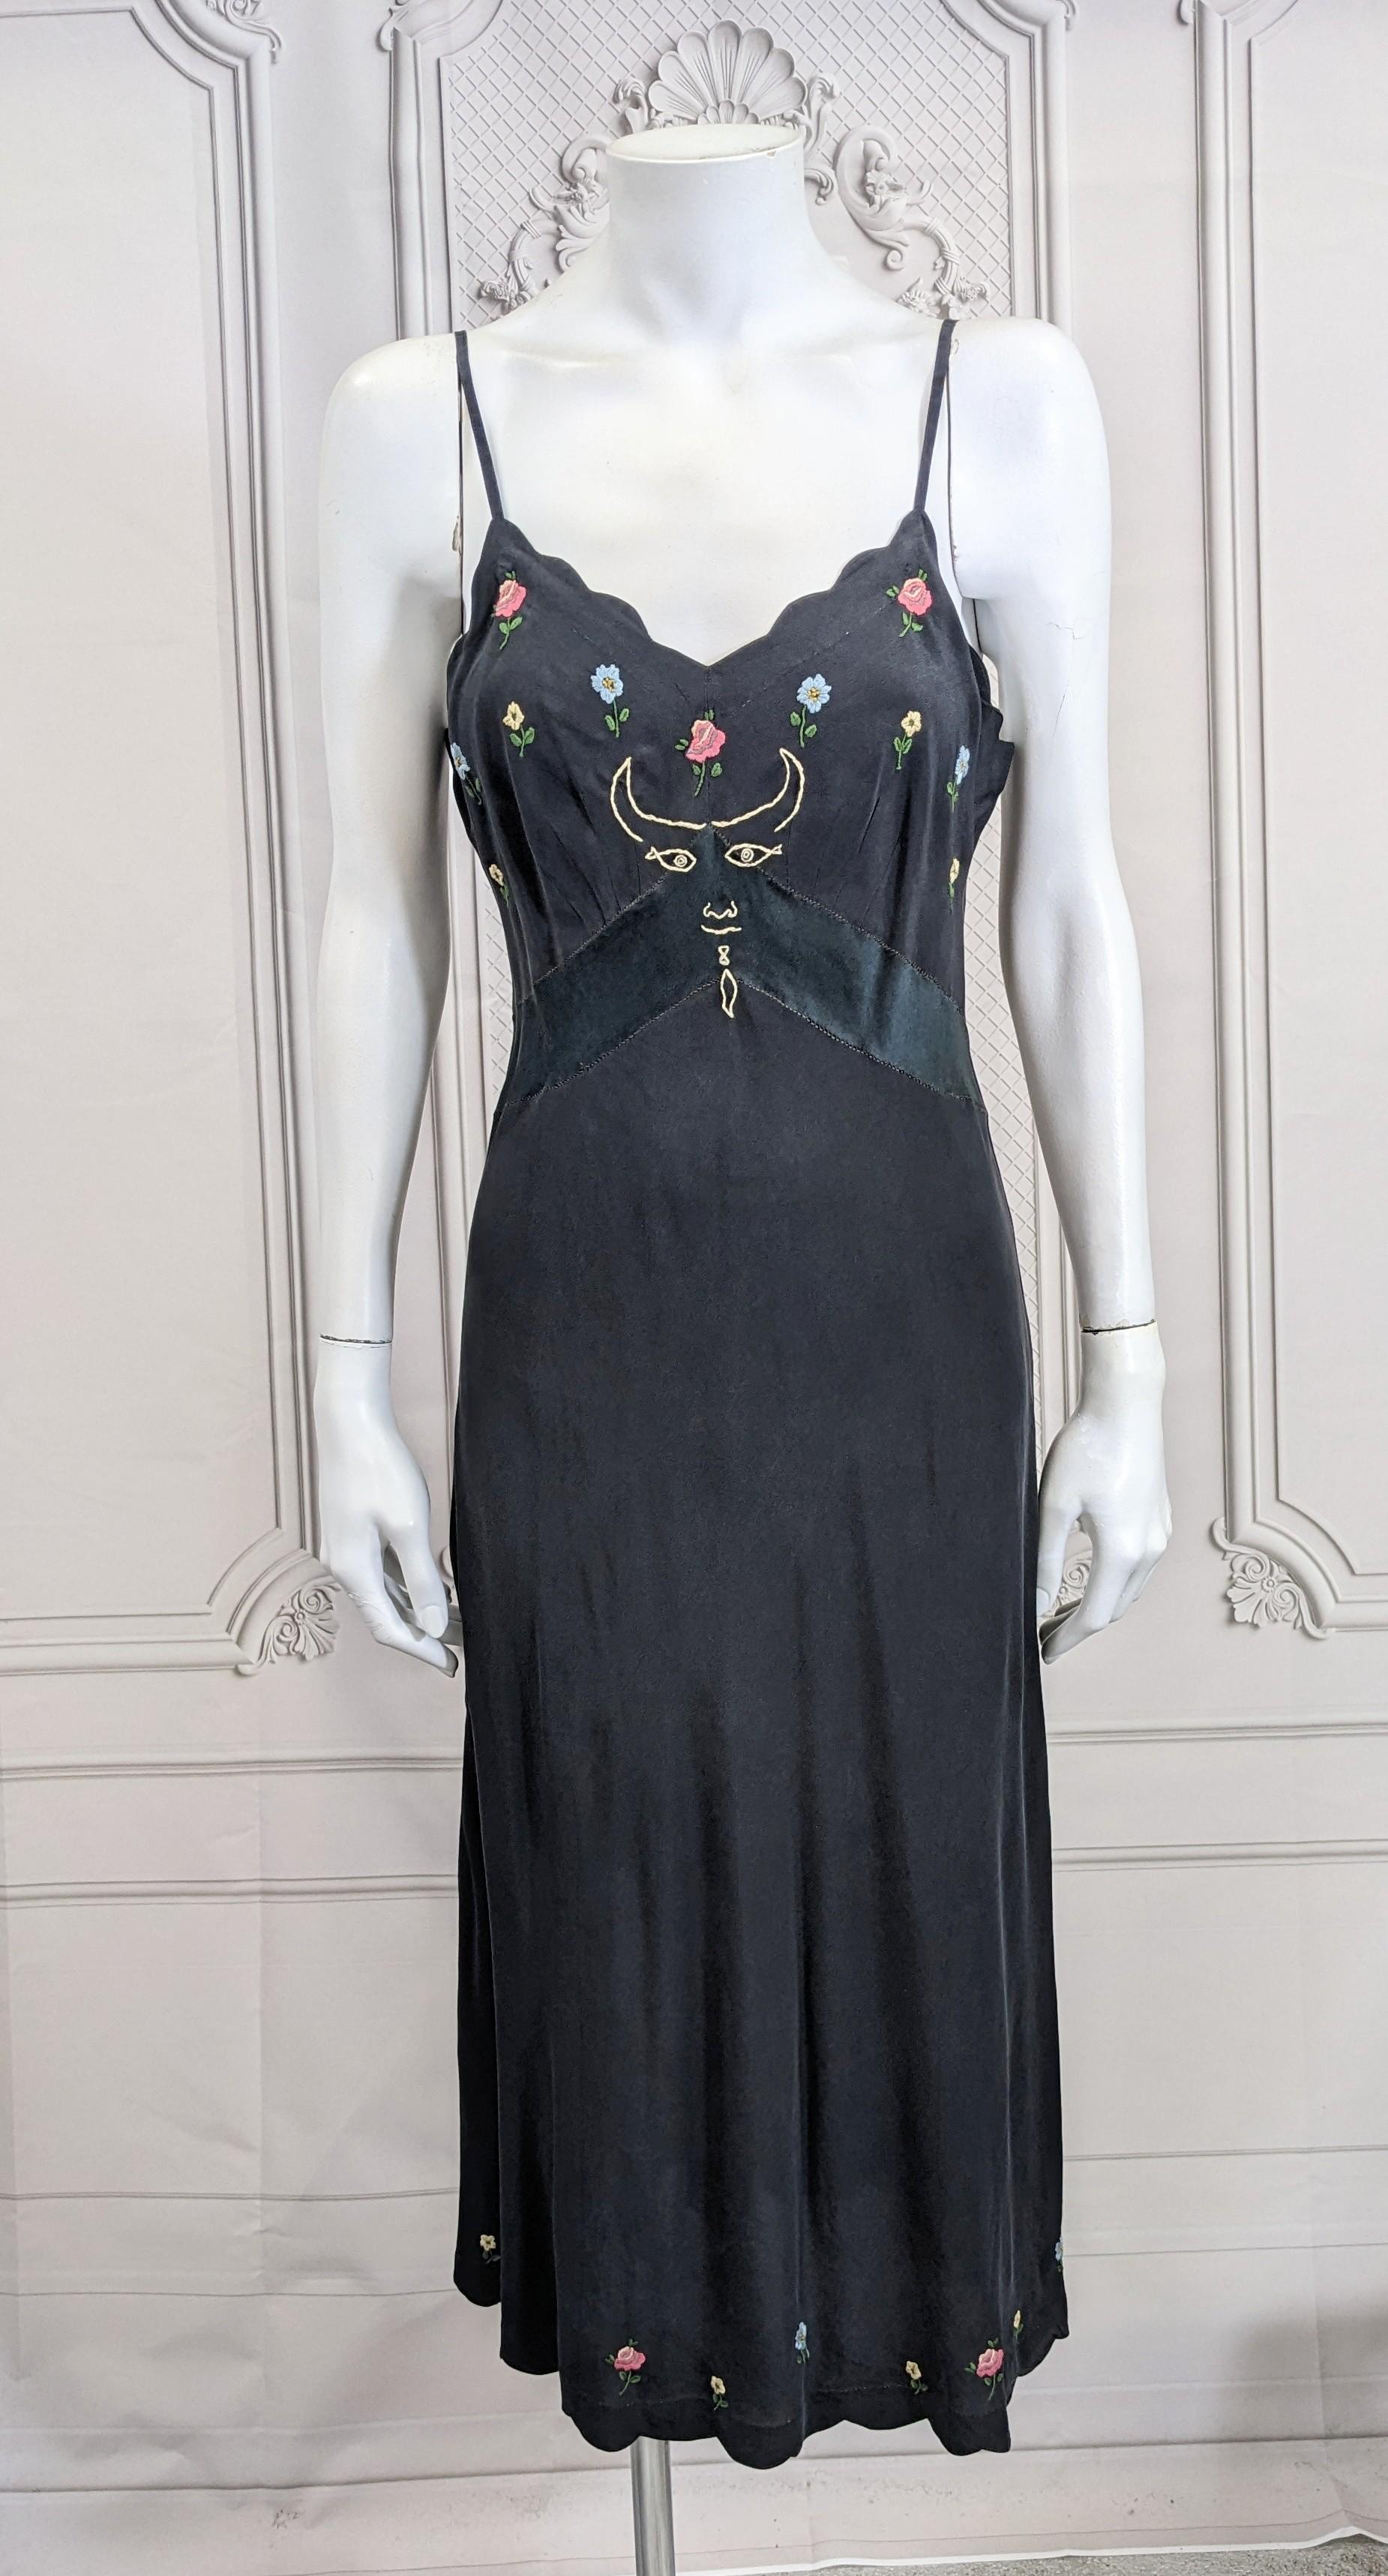 Upcycled Vintage Cocteau Slip, Studio VL. Black silk Art Deco slip with scalloped edges throughout and and embroidered florals. We have embroidered a Jean Cocteau motif across the bodice, with classic fish eyes and horns. The slip is sand washed for